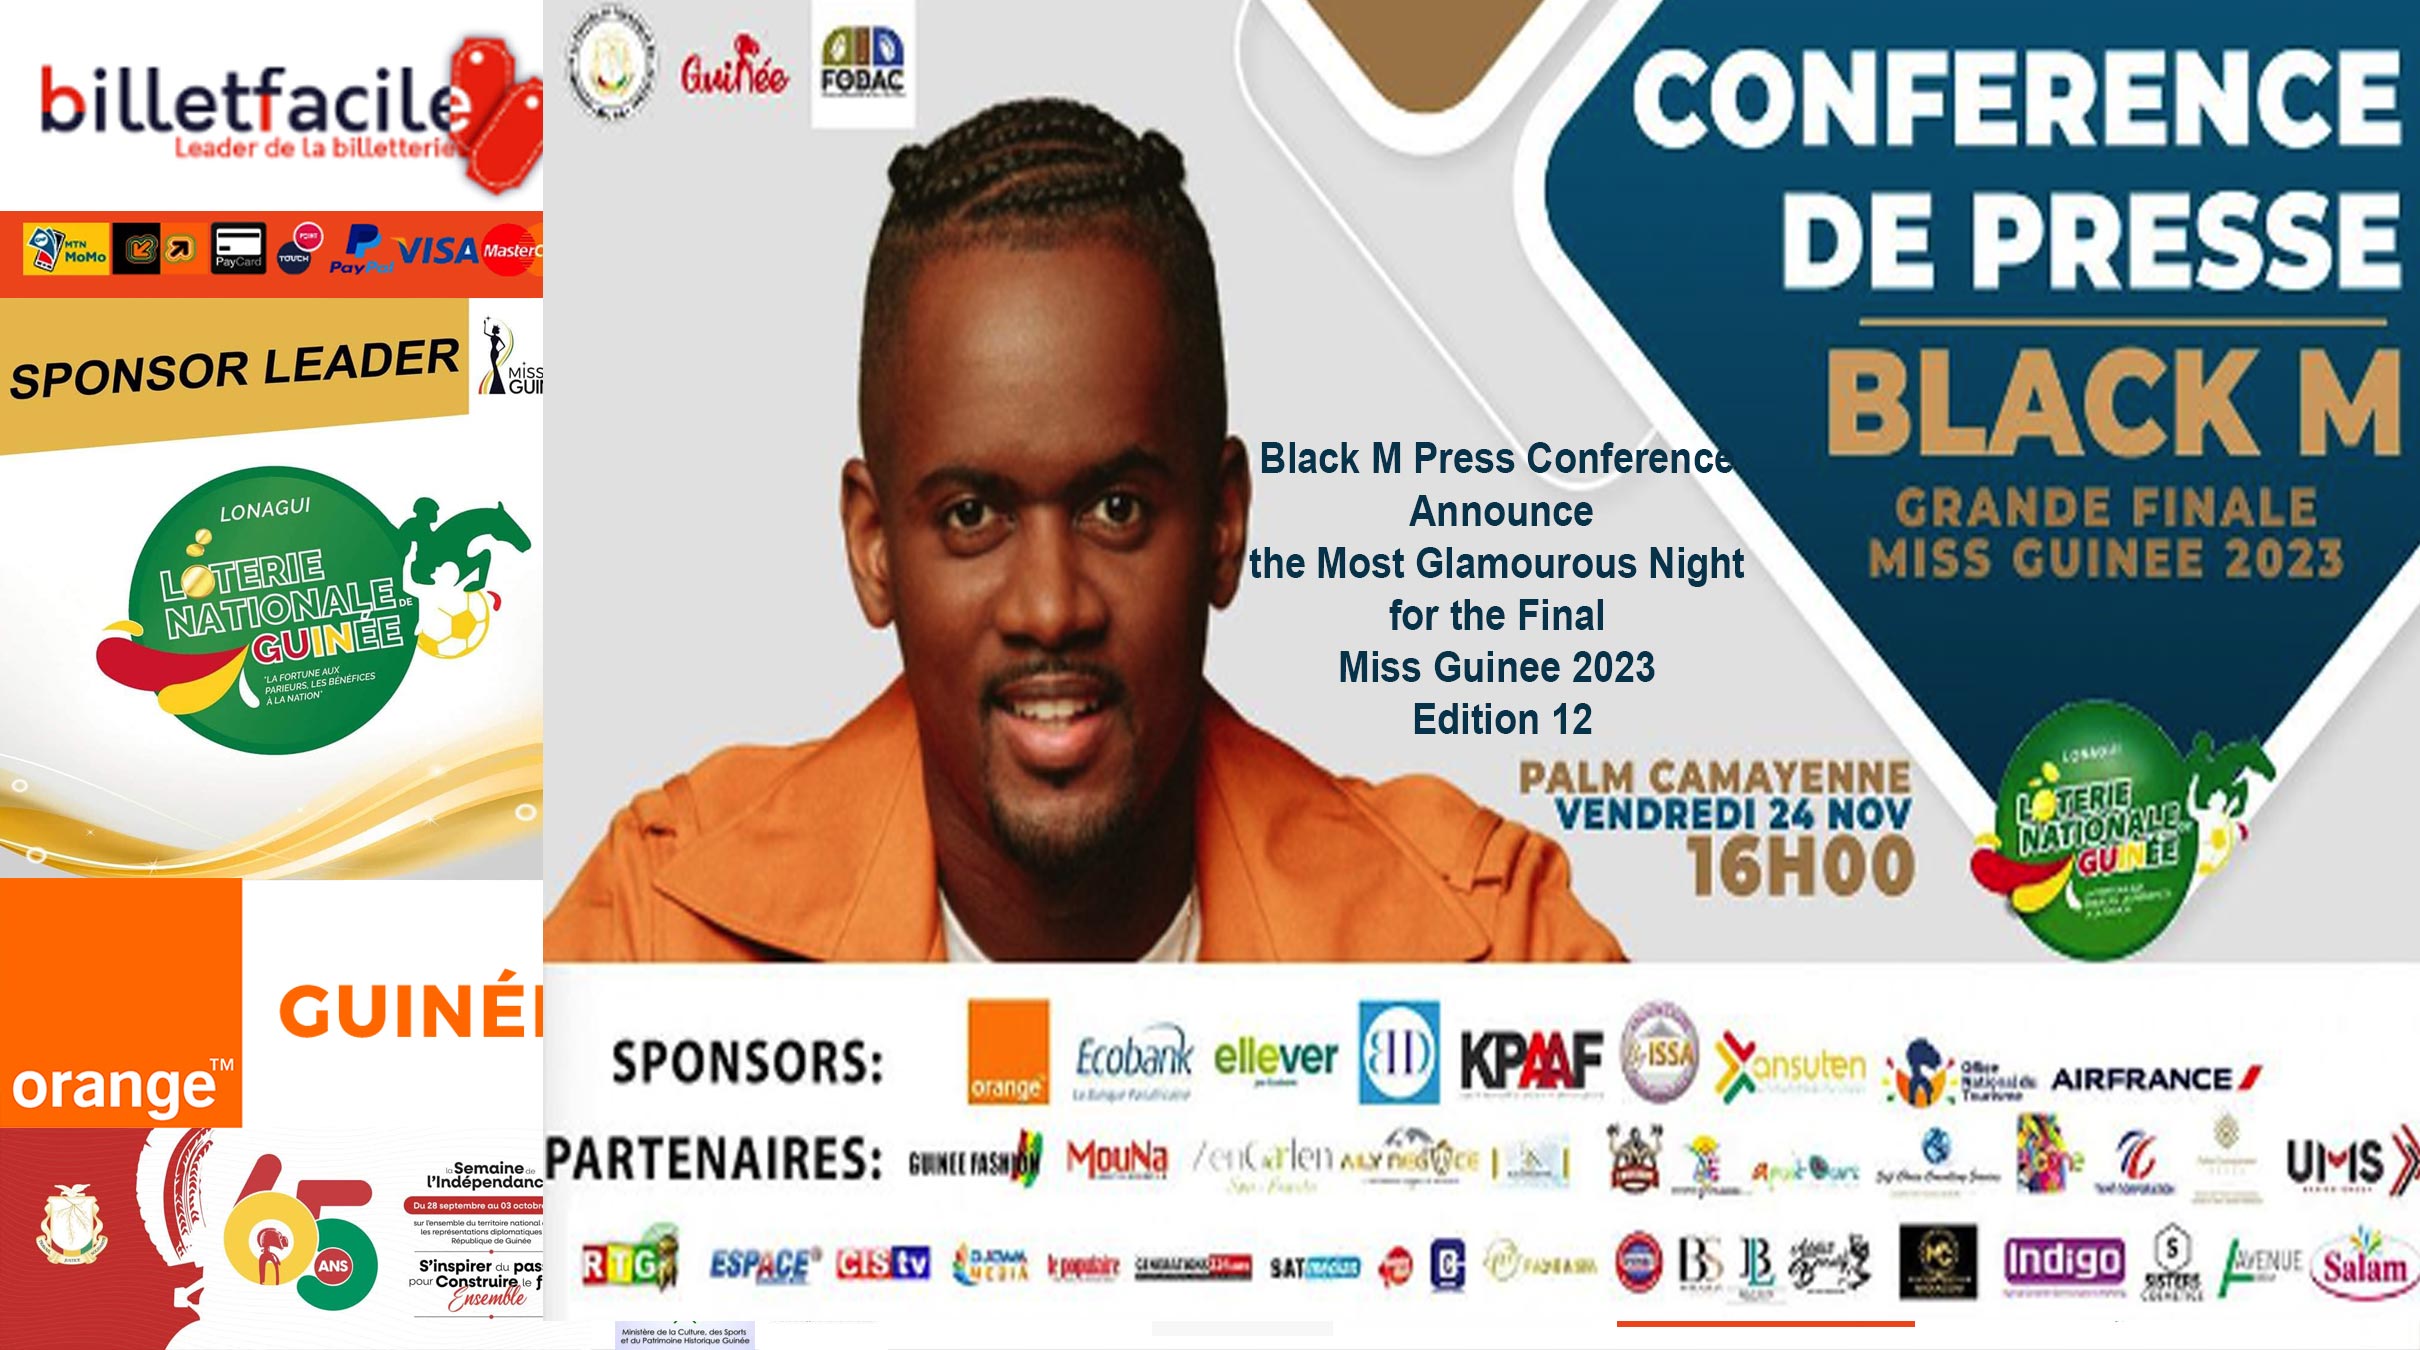 AFRICA-VOGUE-COVER-The-COOMISGUI-&-Miss-GUINEE-2023-Edition-12-Finalists-Black-M-Press-Conference---Announce-the-Most-Glamourous-Night-for-the-Final-Miss-Guinee-2023-Edition-12-DN-AFRICA-Media-Partner